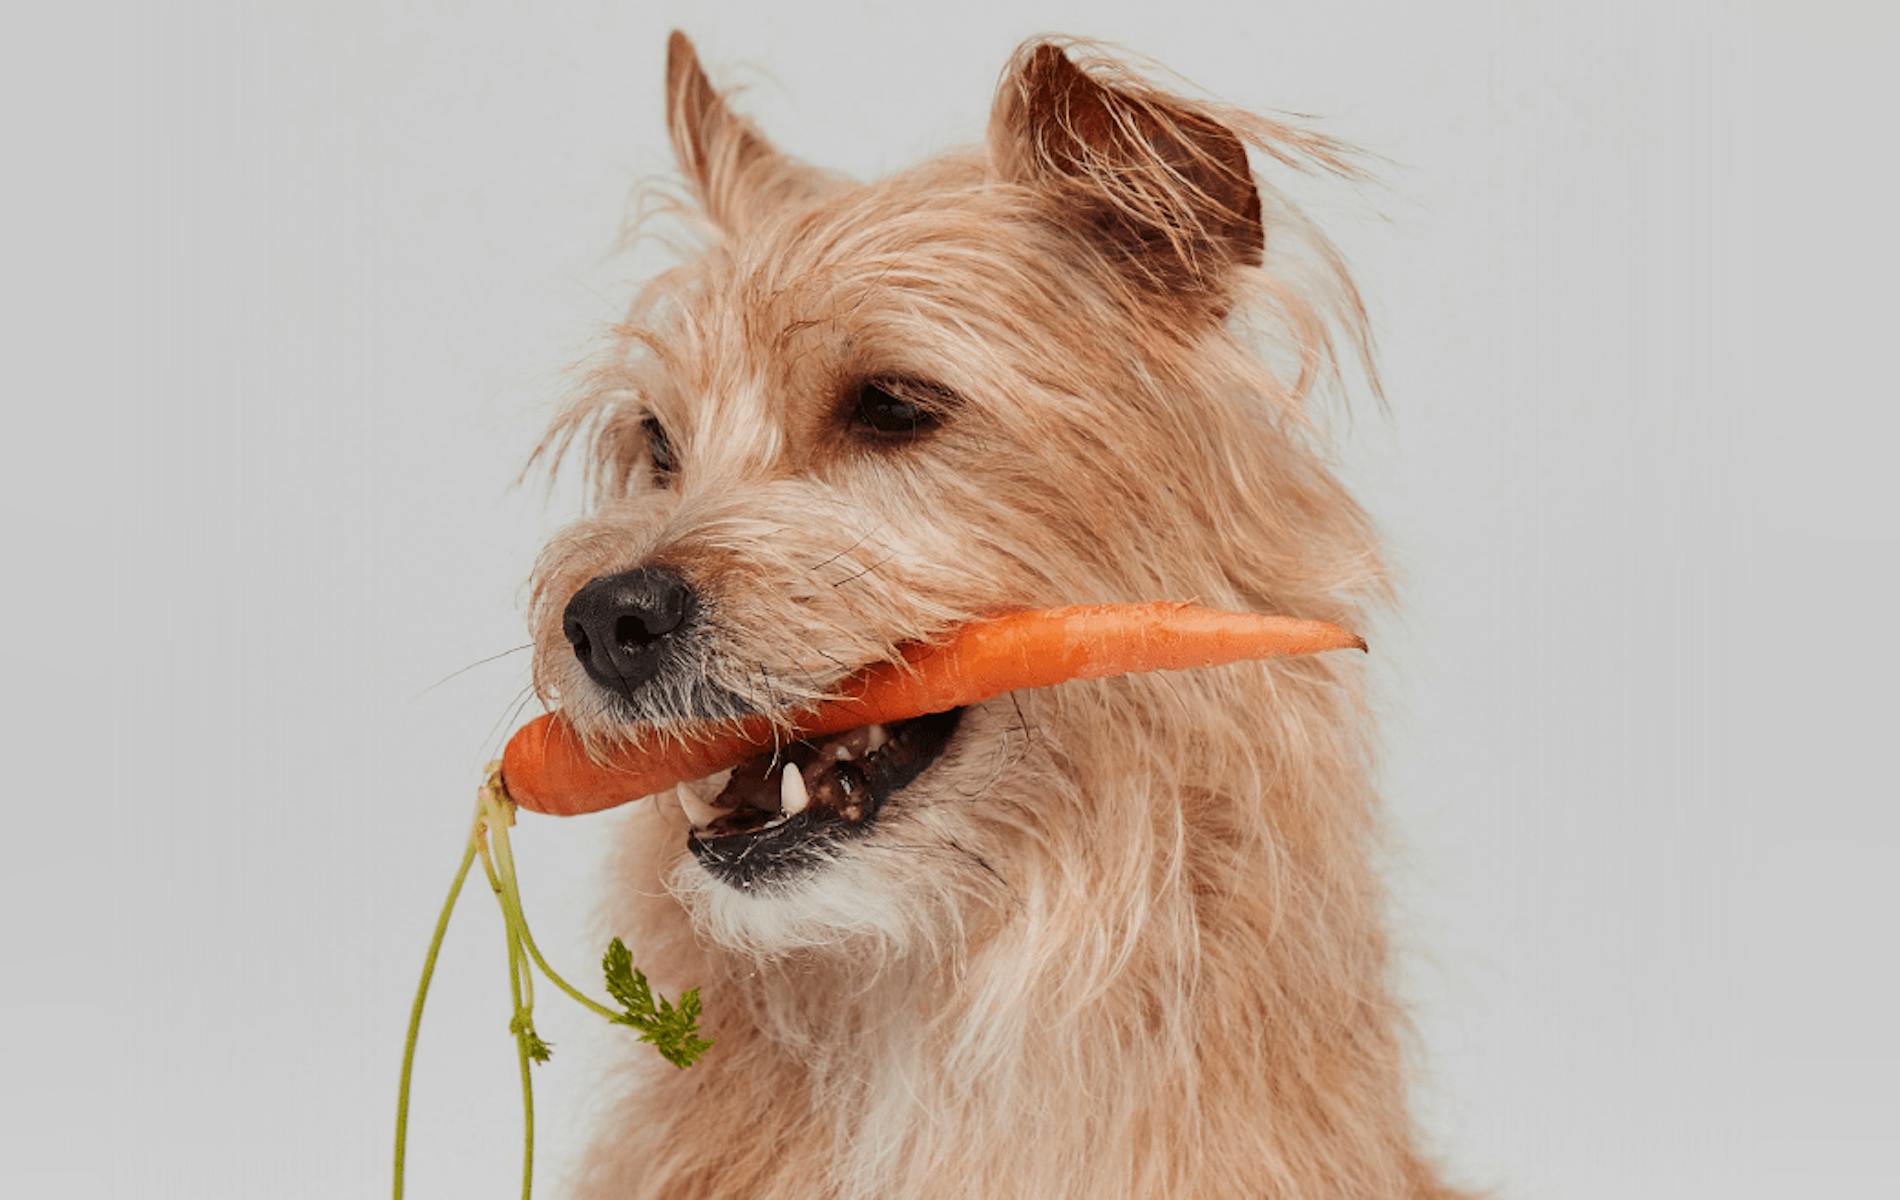 Pup with carrot in its mouth